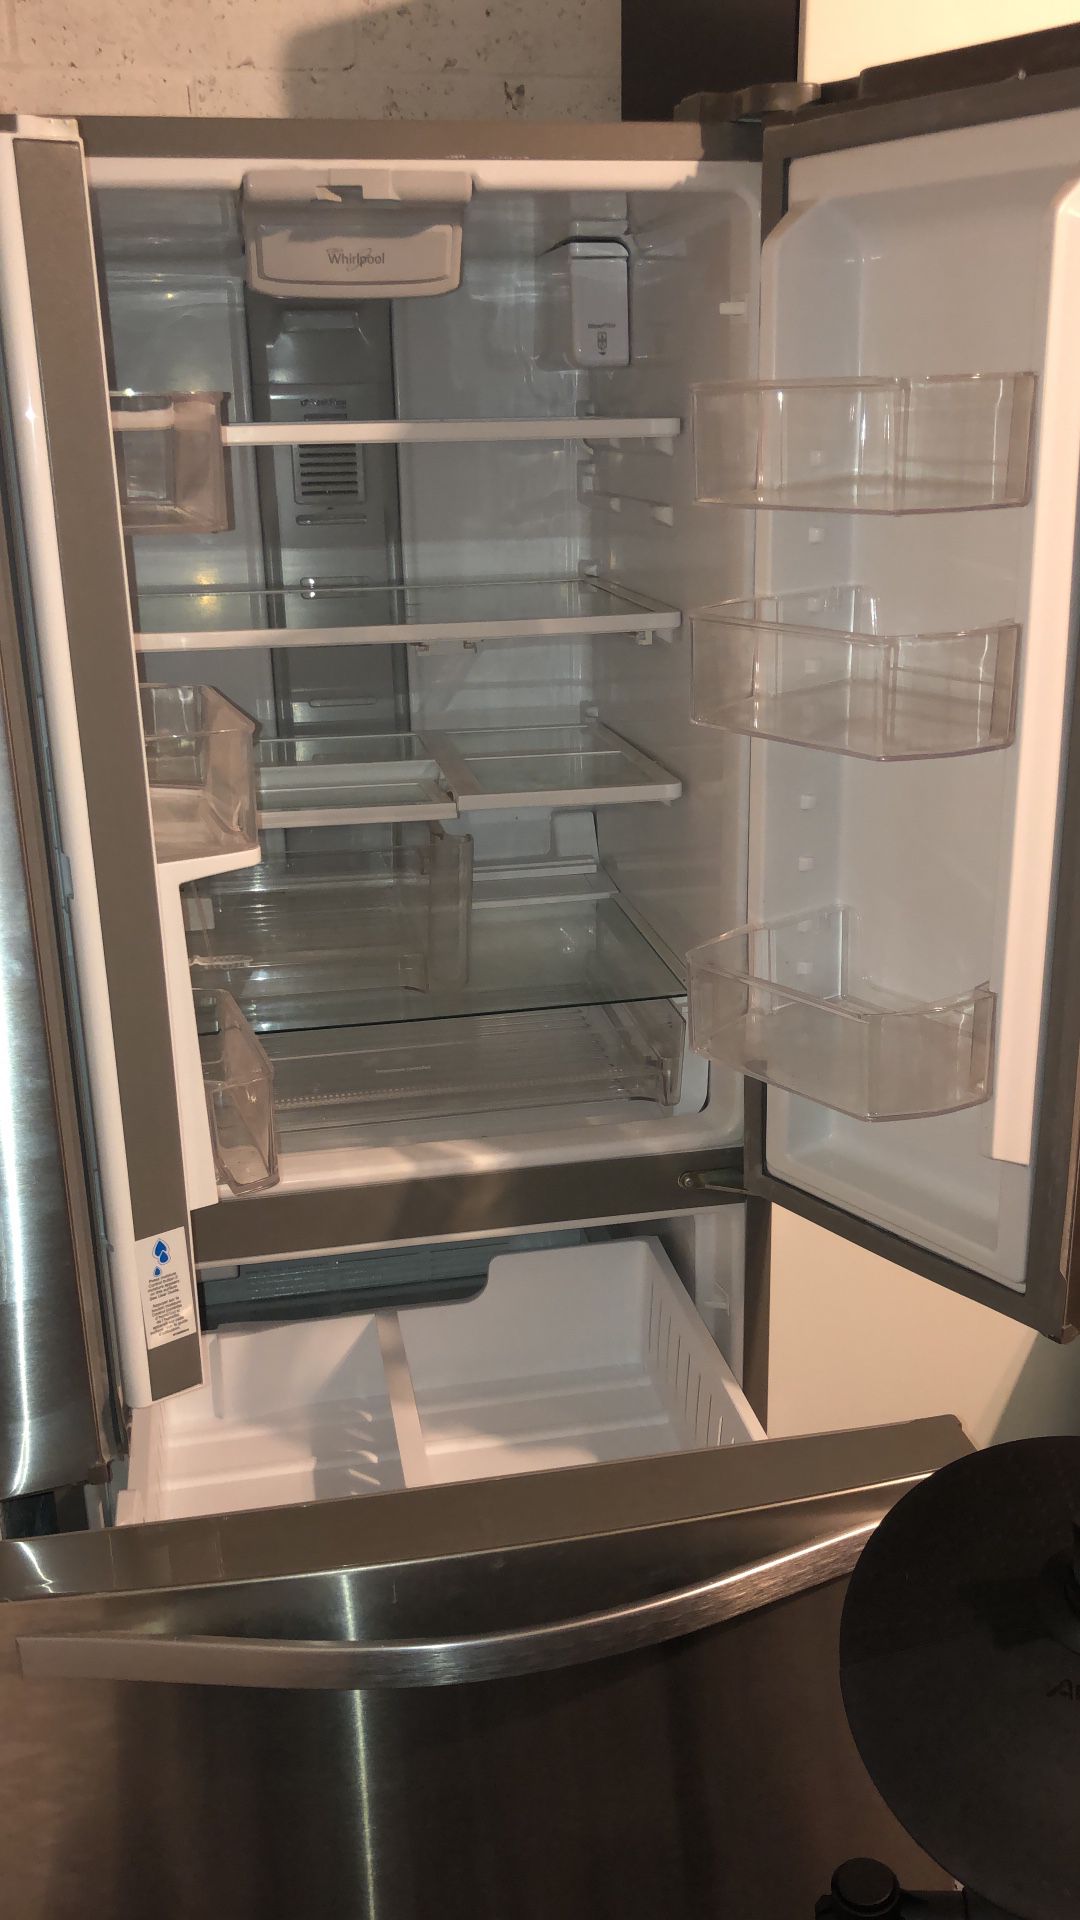 Whirlpool Refrigerator good condition was used only for 6 months.